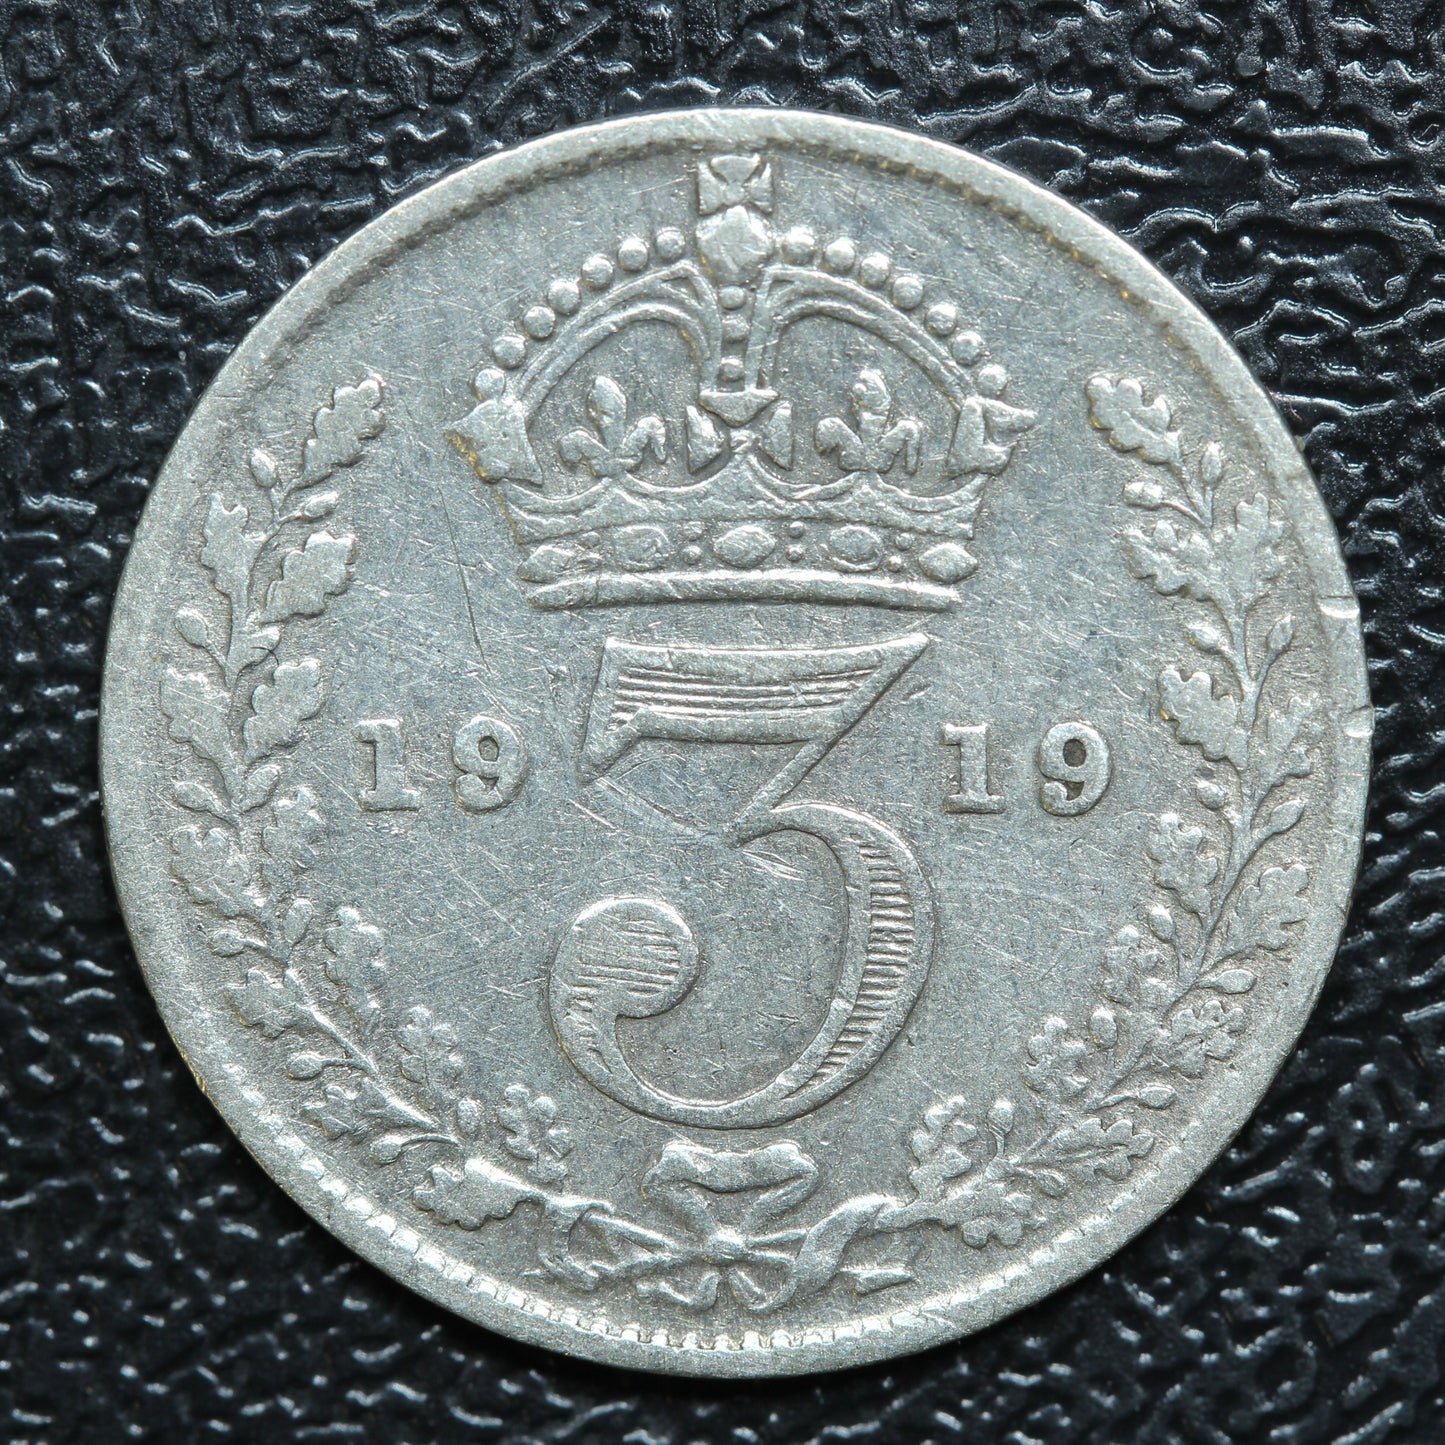 1919 Great Britain 3 Pence Threepence Silver Coin - KM# 813